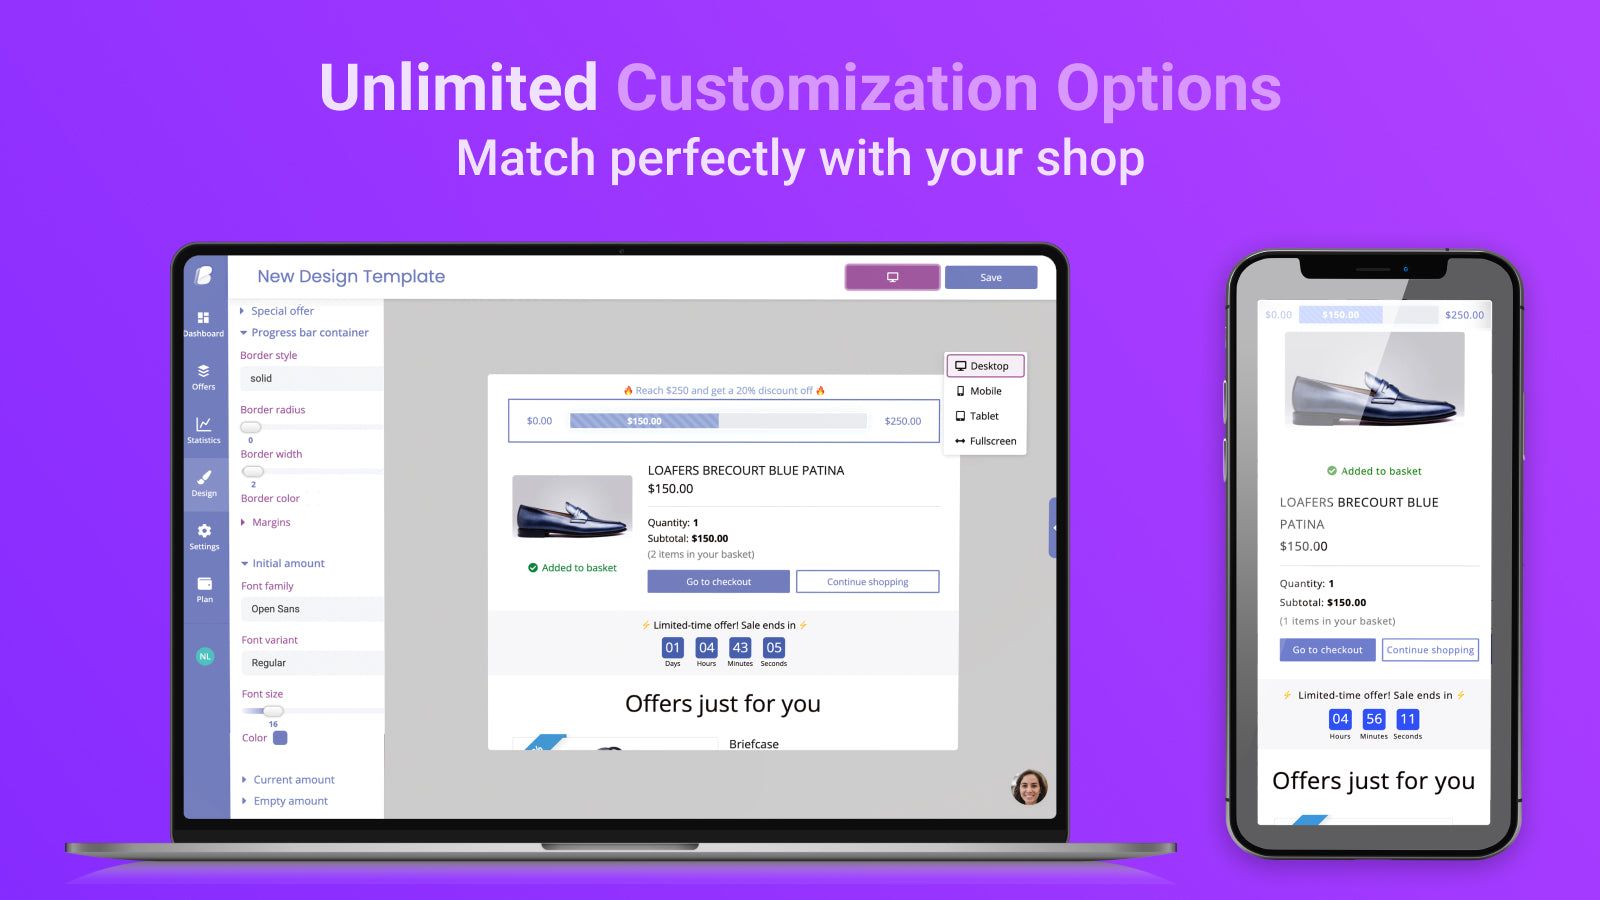 Unlimited Customization Options, match perfectly with your shop